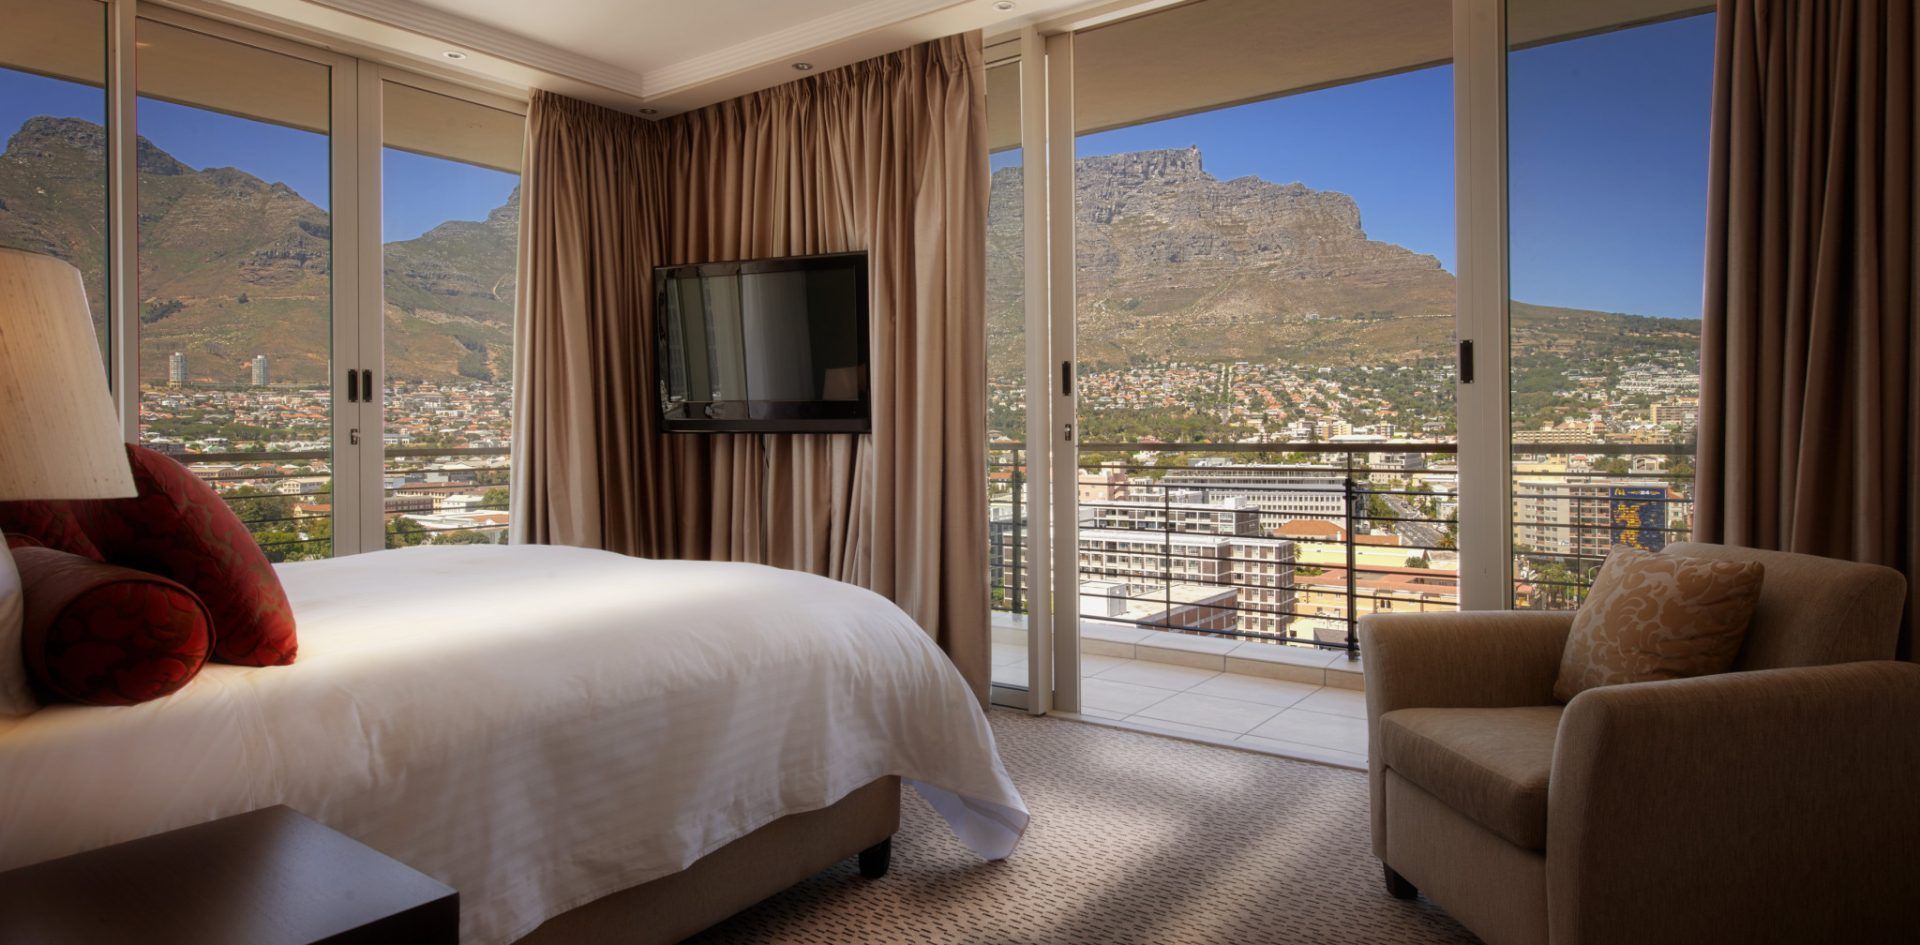 Photo 6 of Pepperclub Presidential Suite accommodation in City Centre, Cape Town with 3 bedrooms and 3 bathrooms